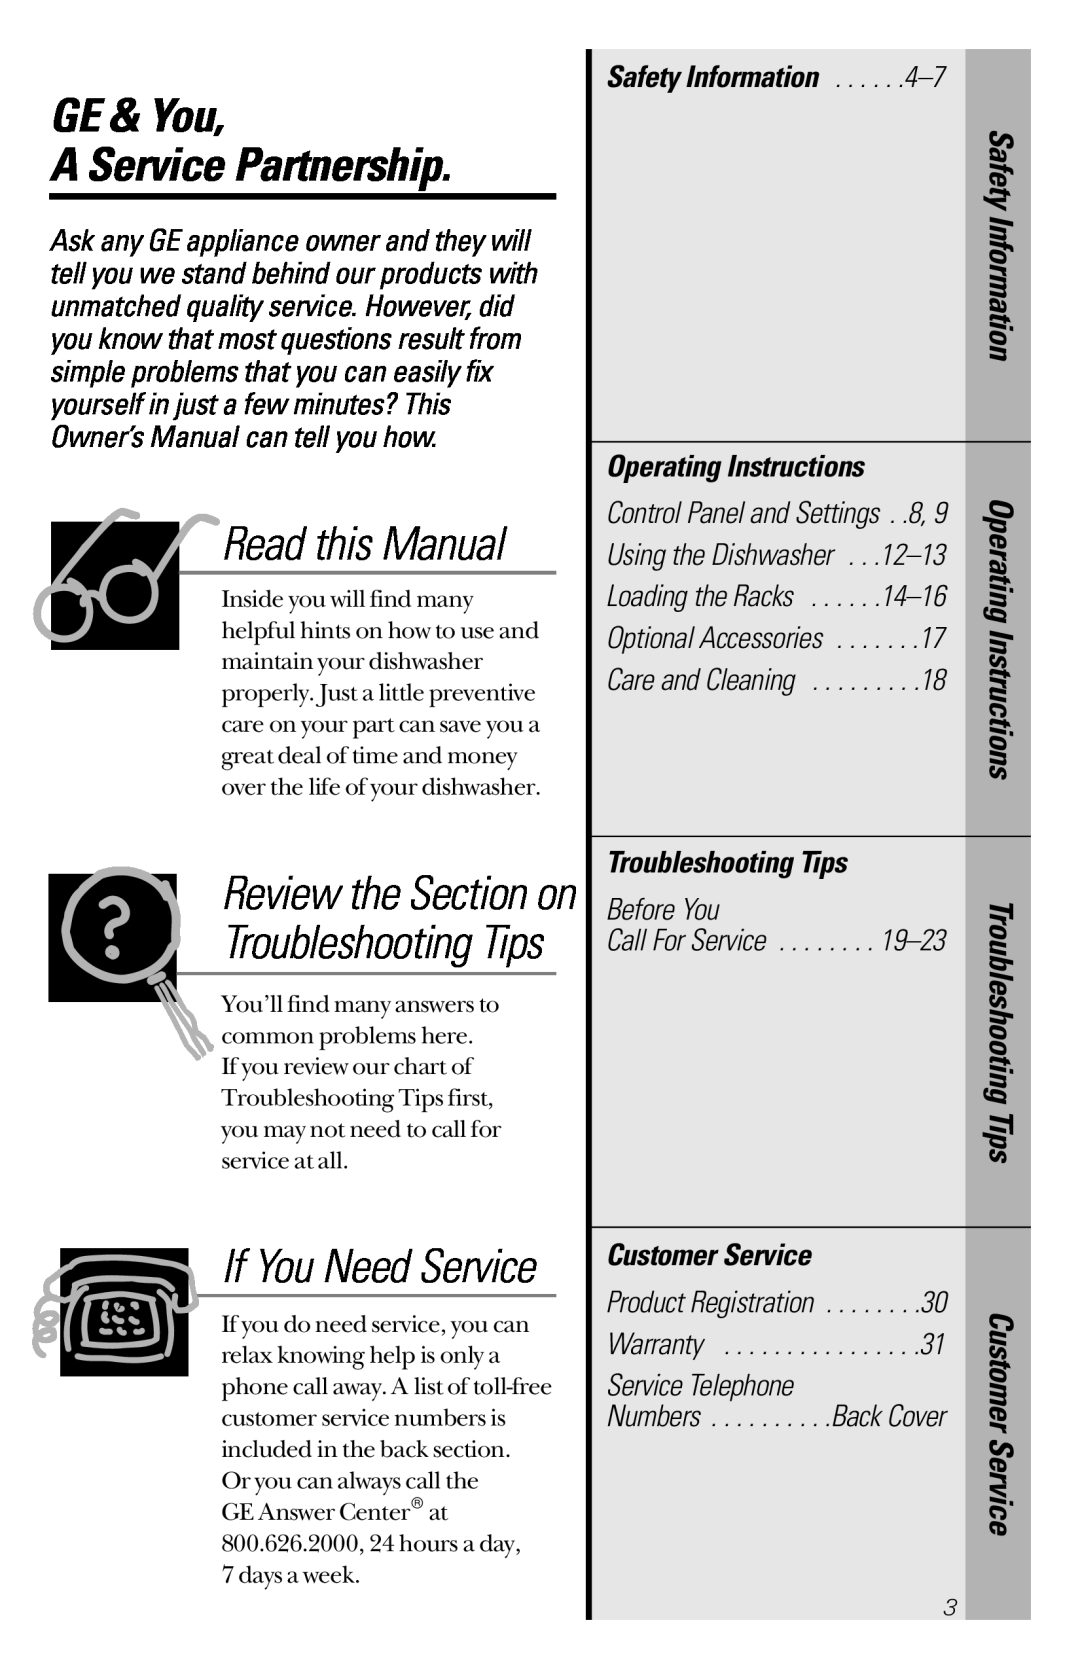 GE GSD4112 GE & You A Service Partnership, Read this Manual, Review the Section on, Customer Service, Troubleshooting Tips 